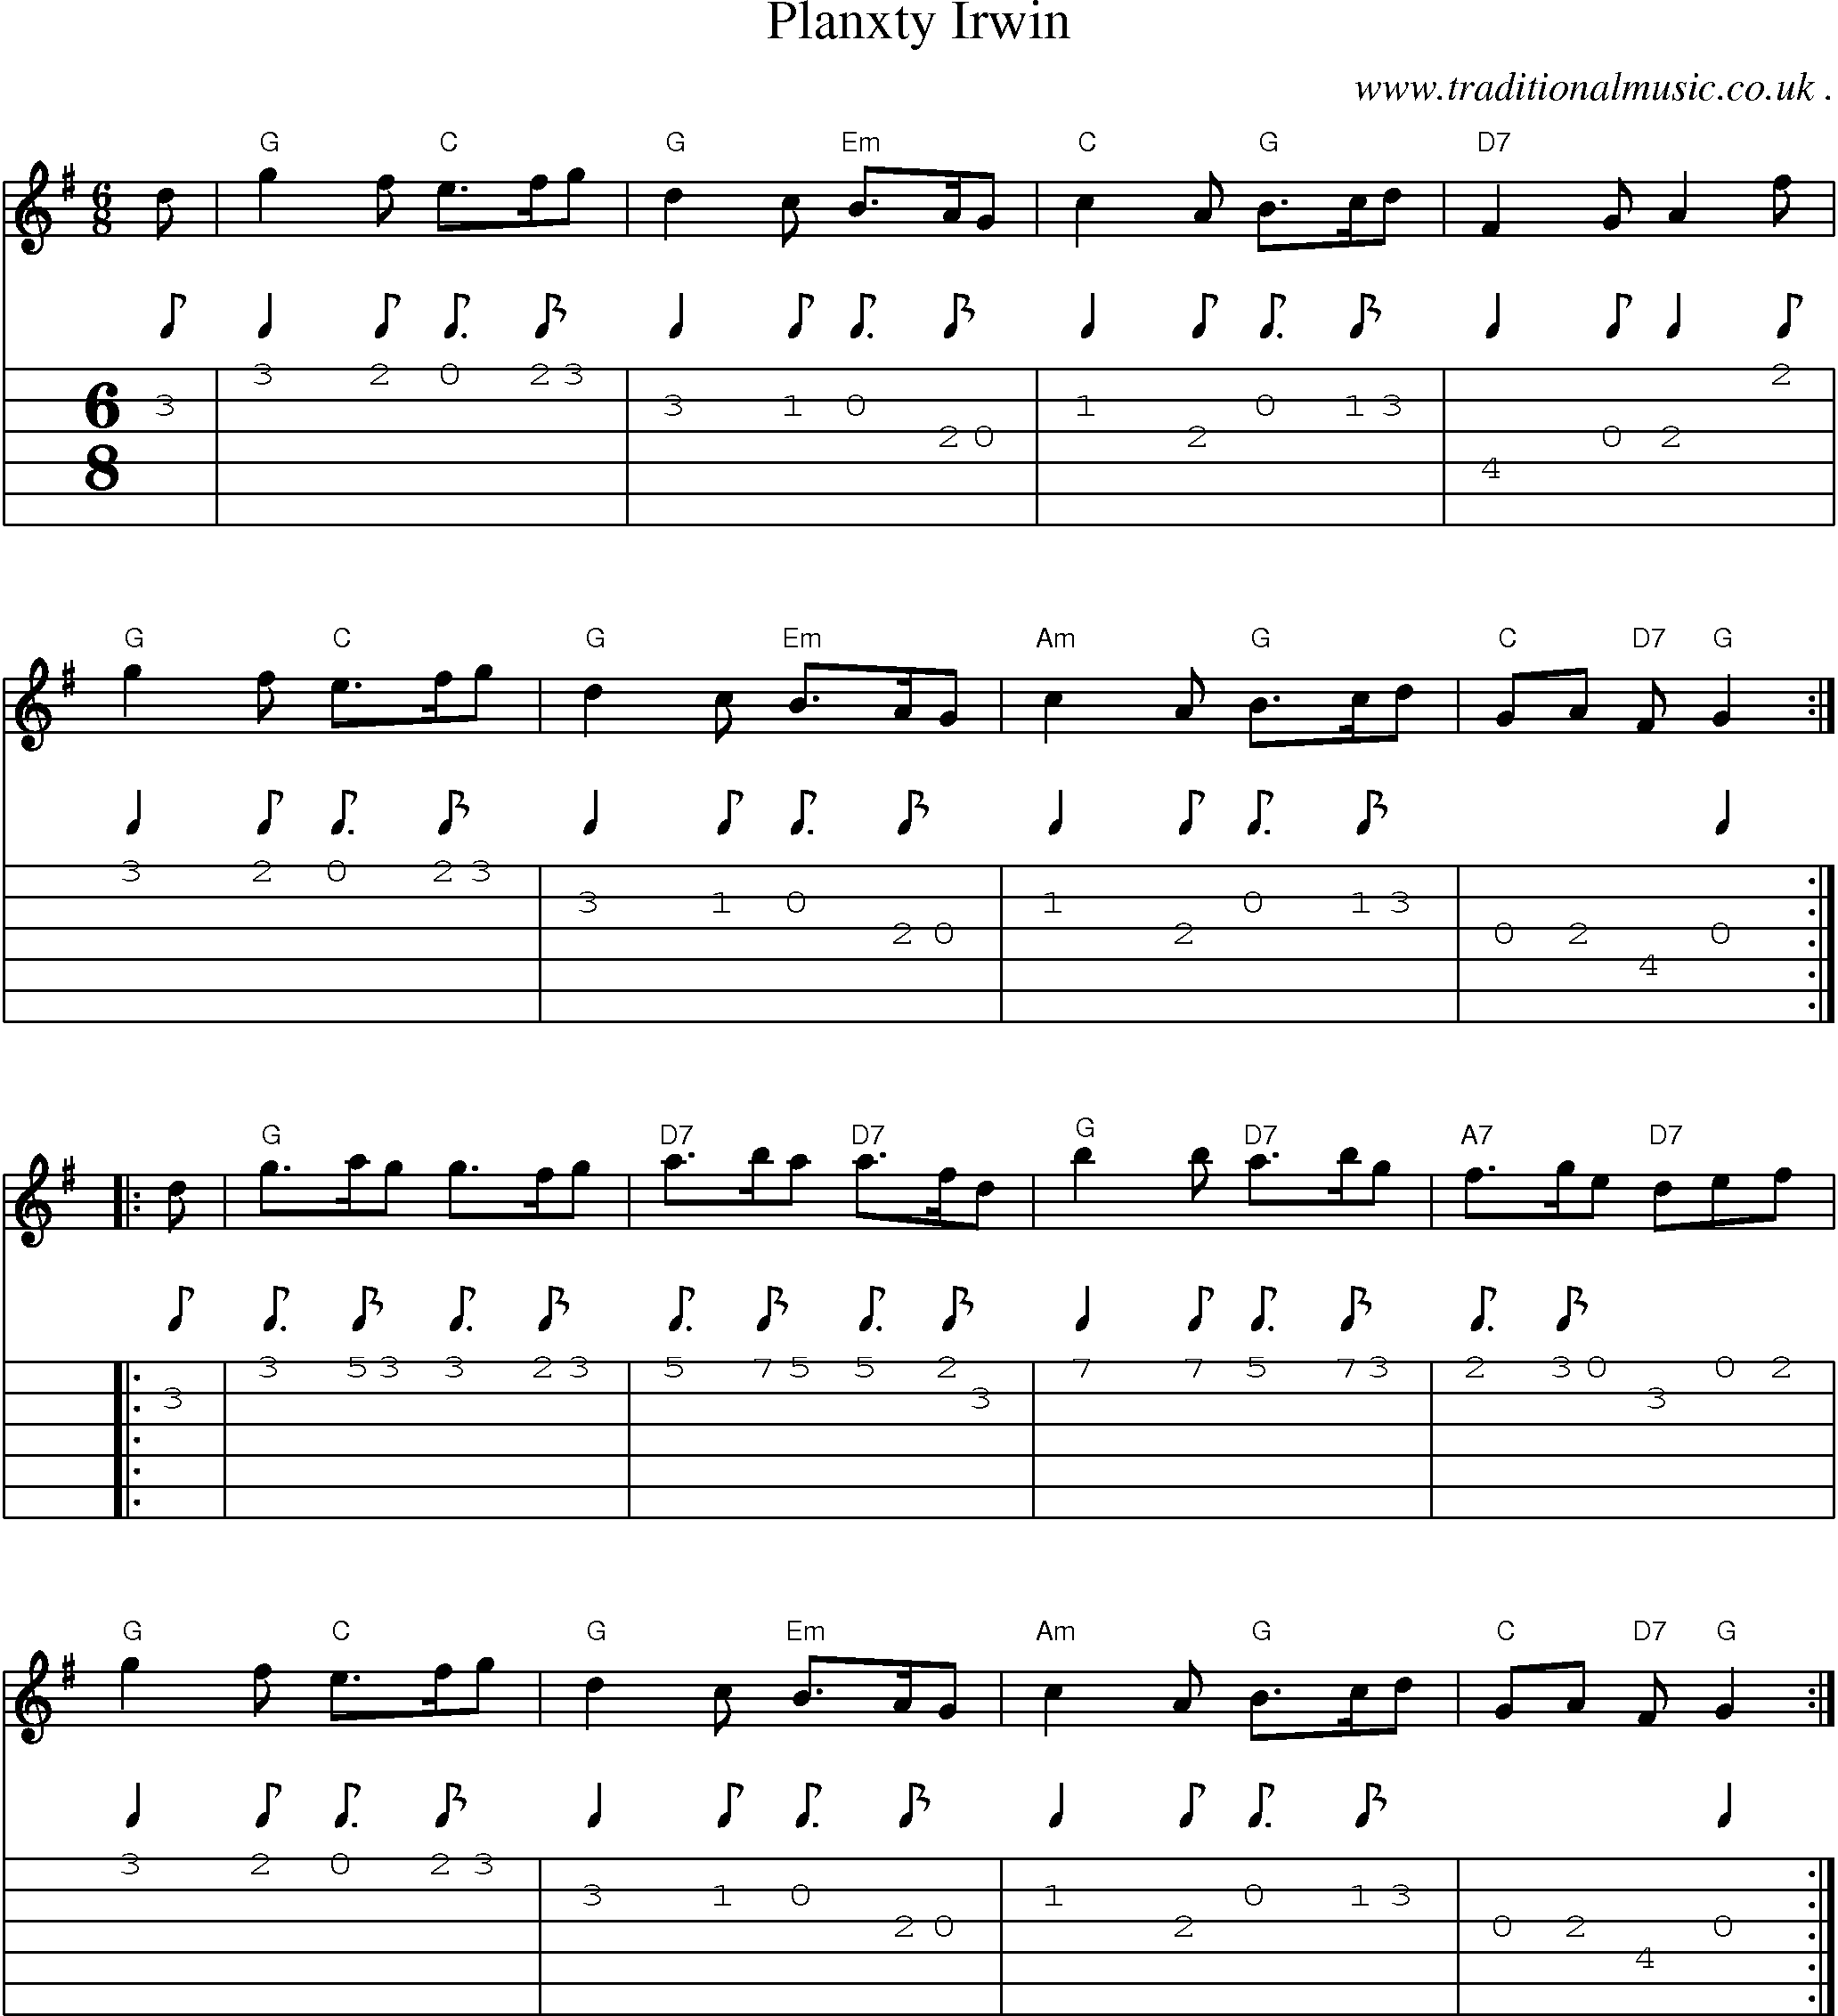 Music Score and Guitar Tabs for Planxty Irwin